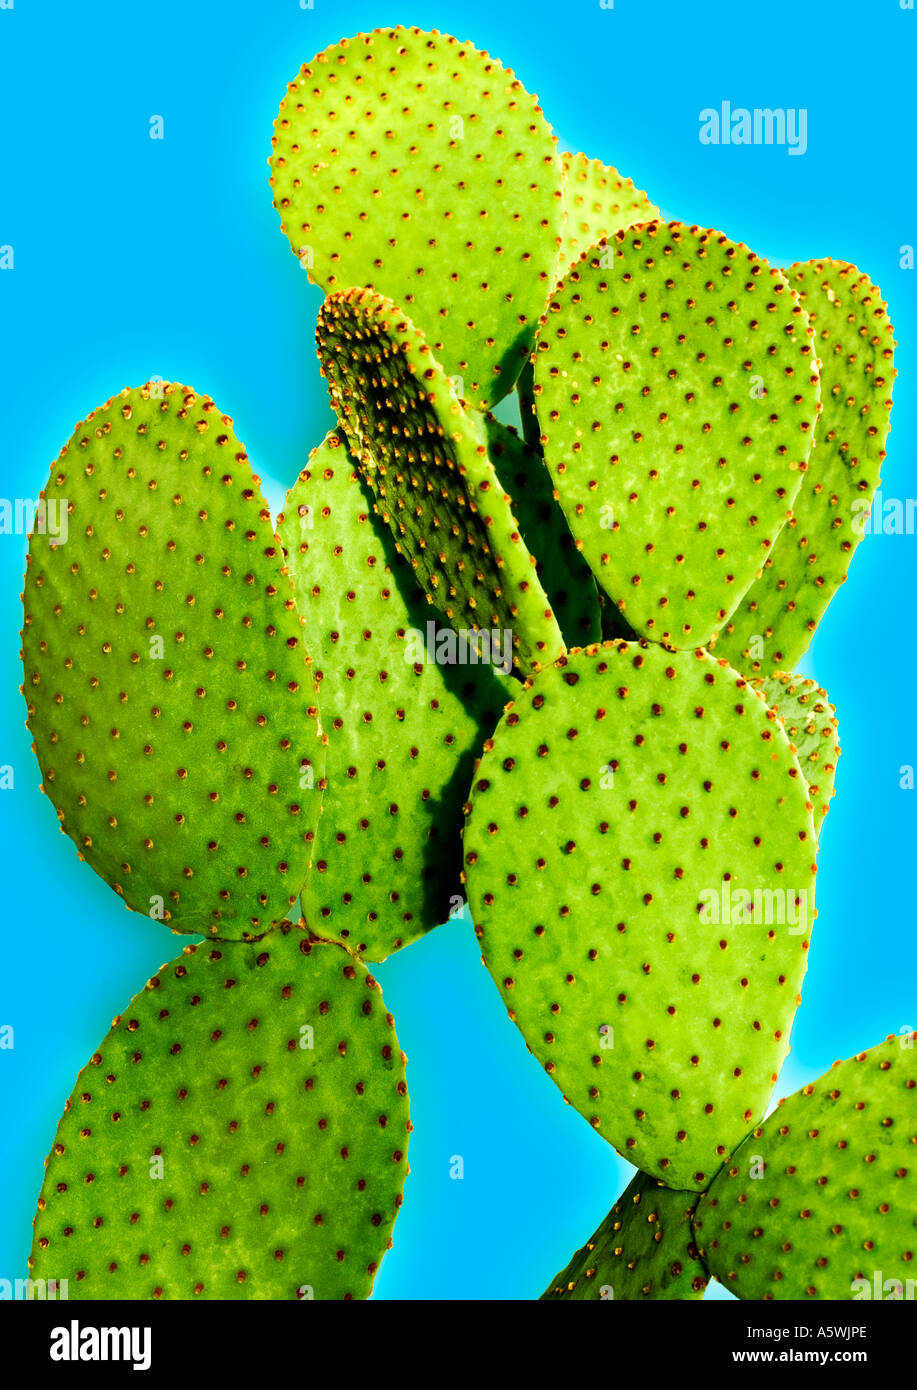 Bright green cactus shot against bright blue background Stock Photo